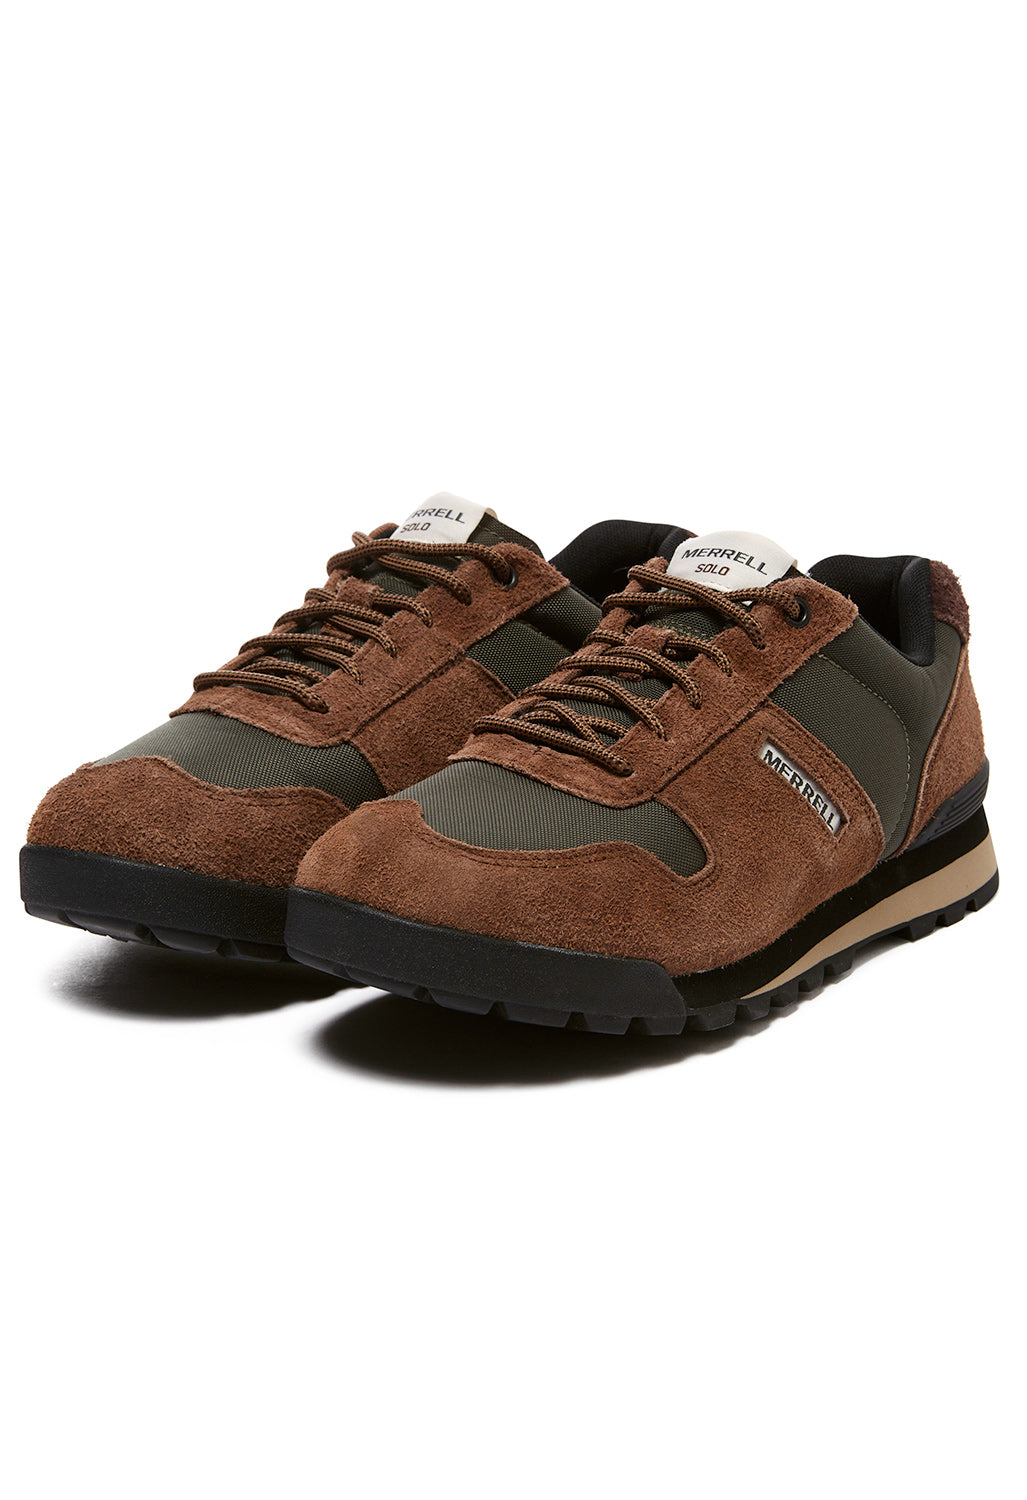 Merrell Solo 1TRL Luxe Men's Shoes - Earth/Ivy